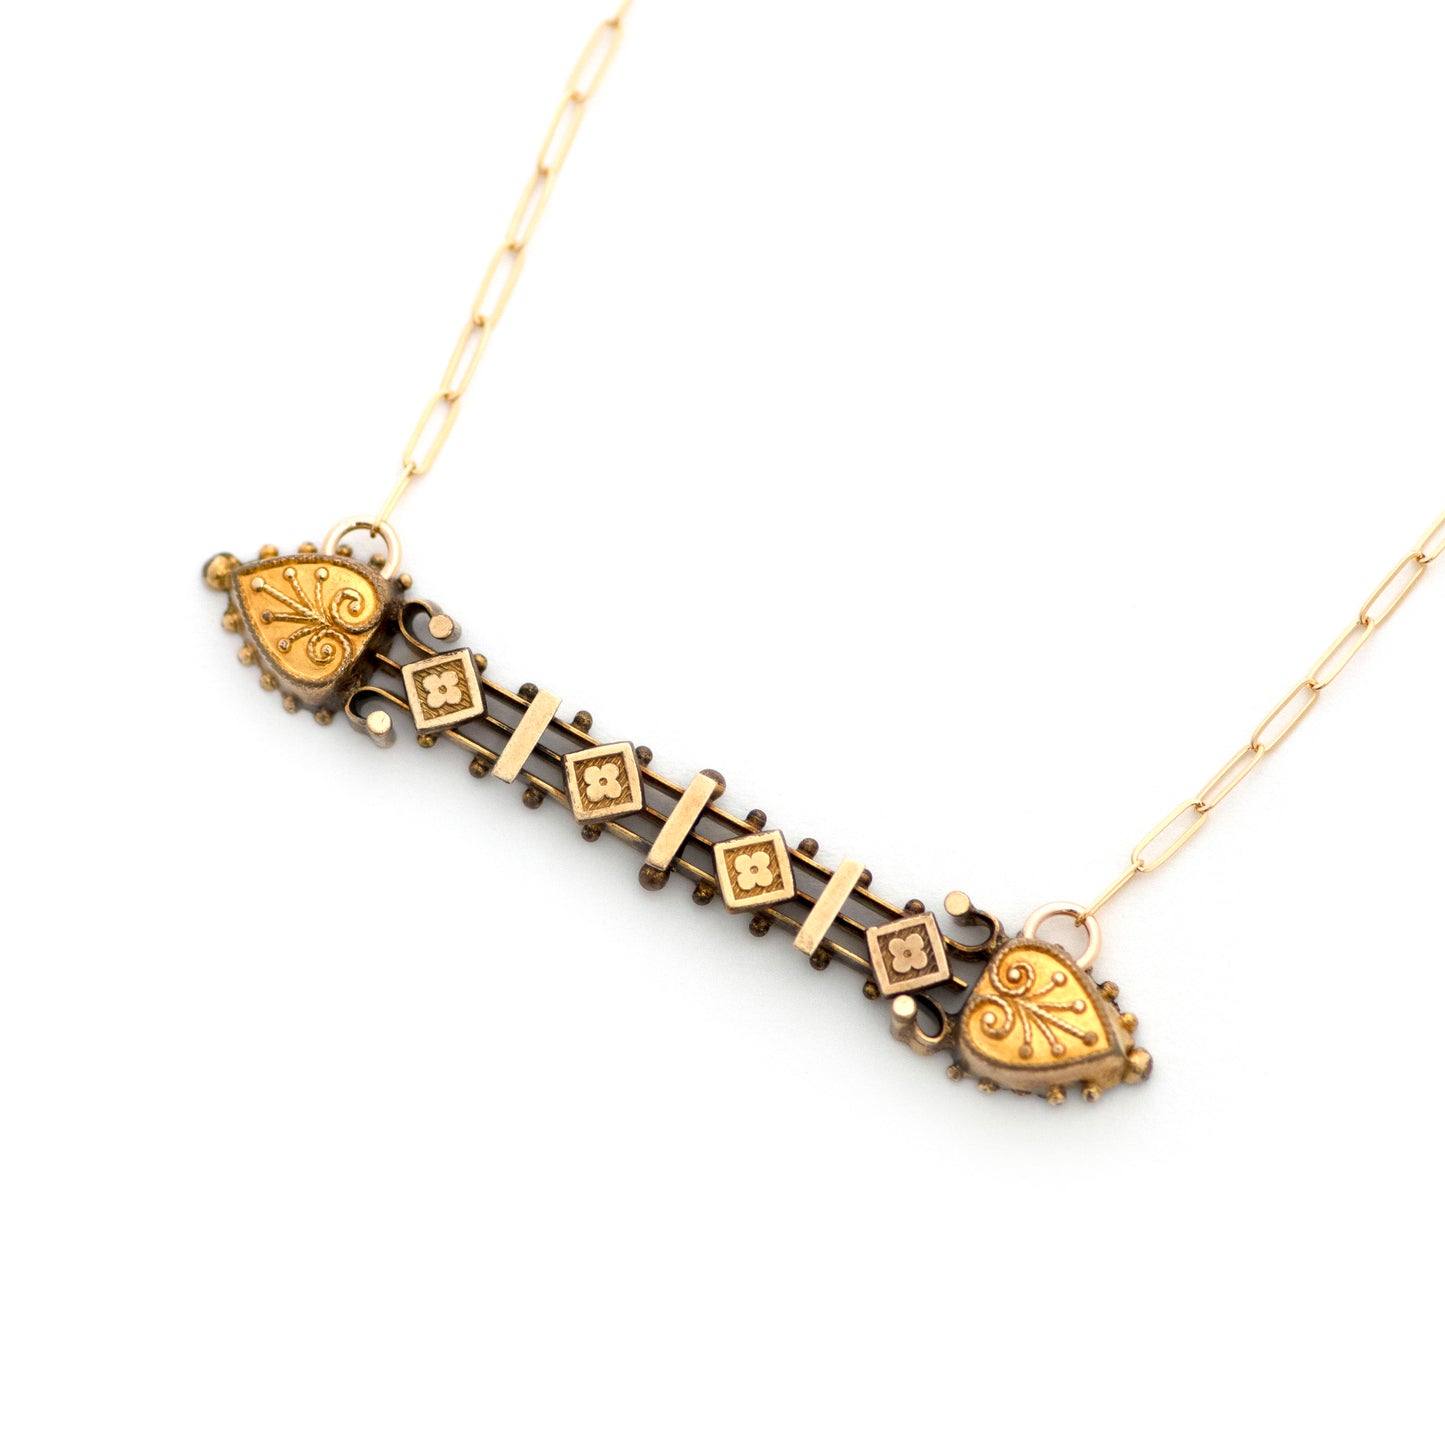 This one-of-a-kind conversion necklace is made up of:  Gold filled Victorian bar pin pendant from the late 1800s with Etruscan Revival filigree details. Pendant measures 2.3" wide.  New 14k gold filled chain